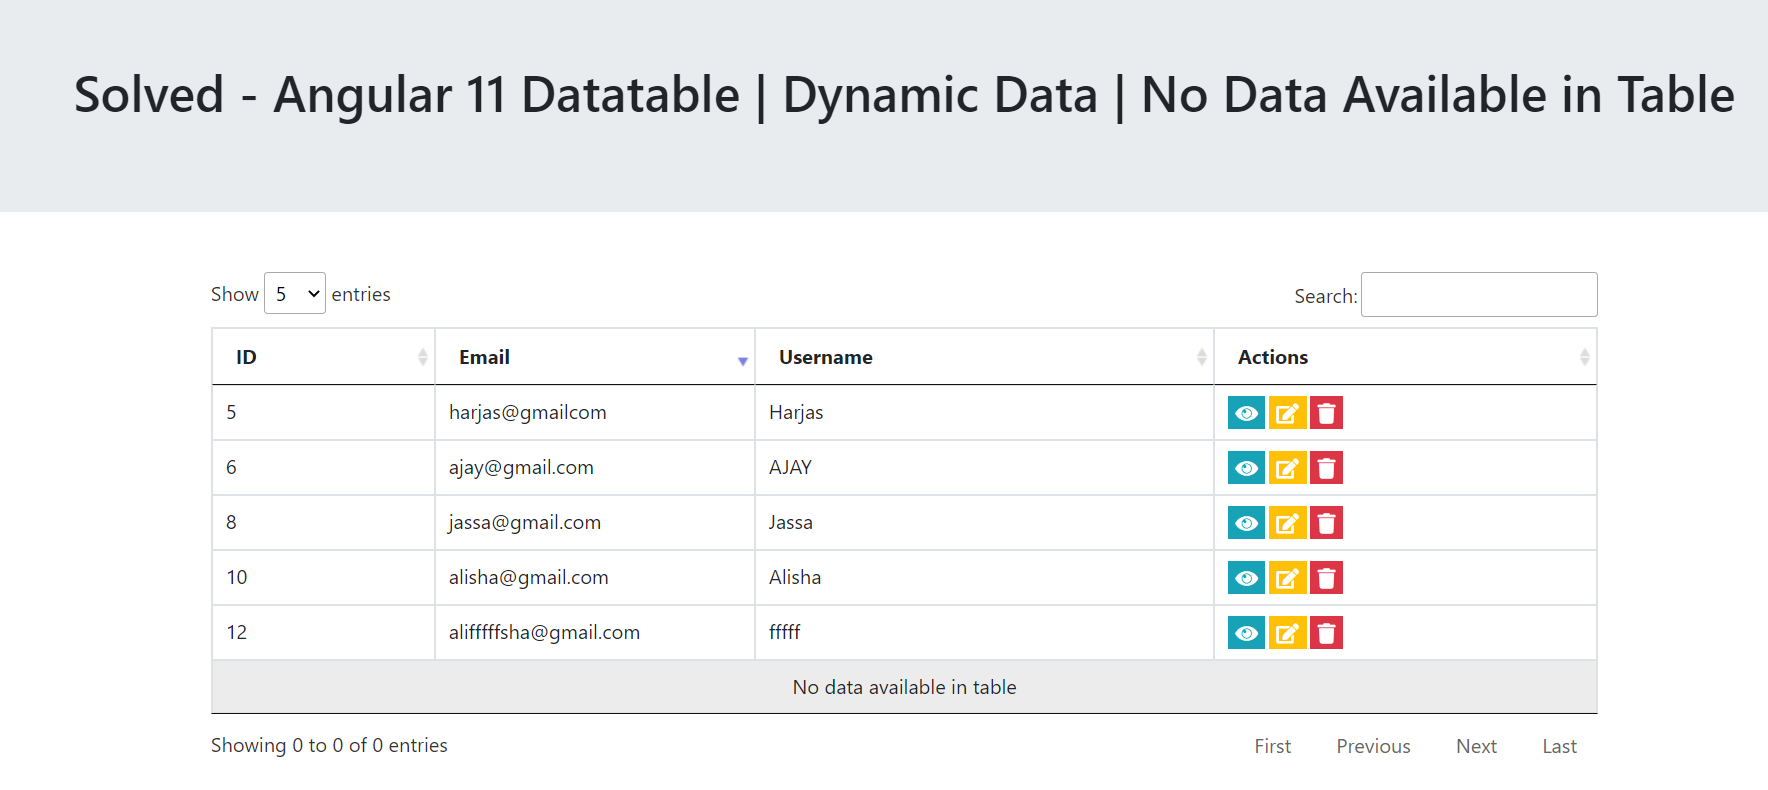 Solved - Angular 11 Datatable | Dynamic Data | No Data Available in Table